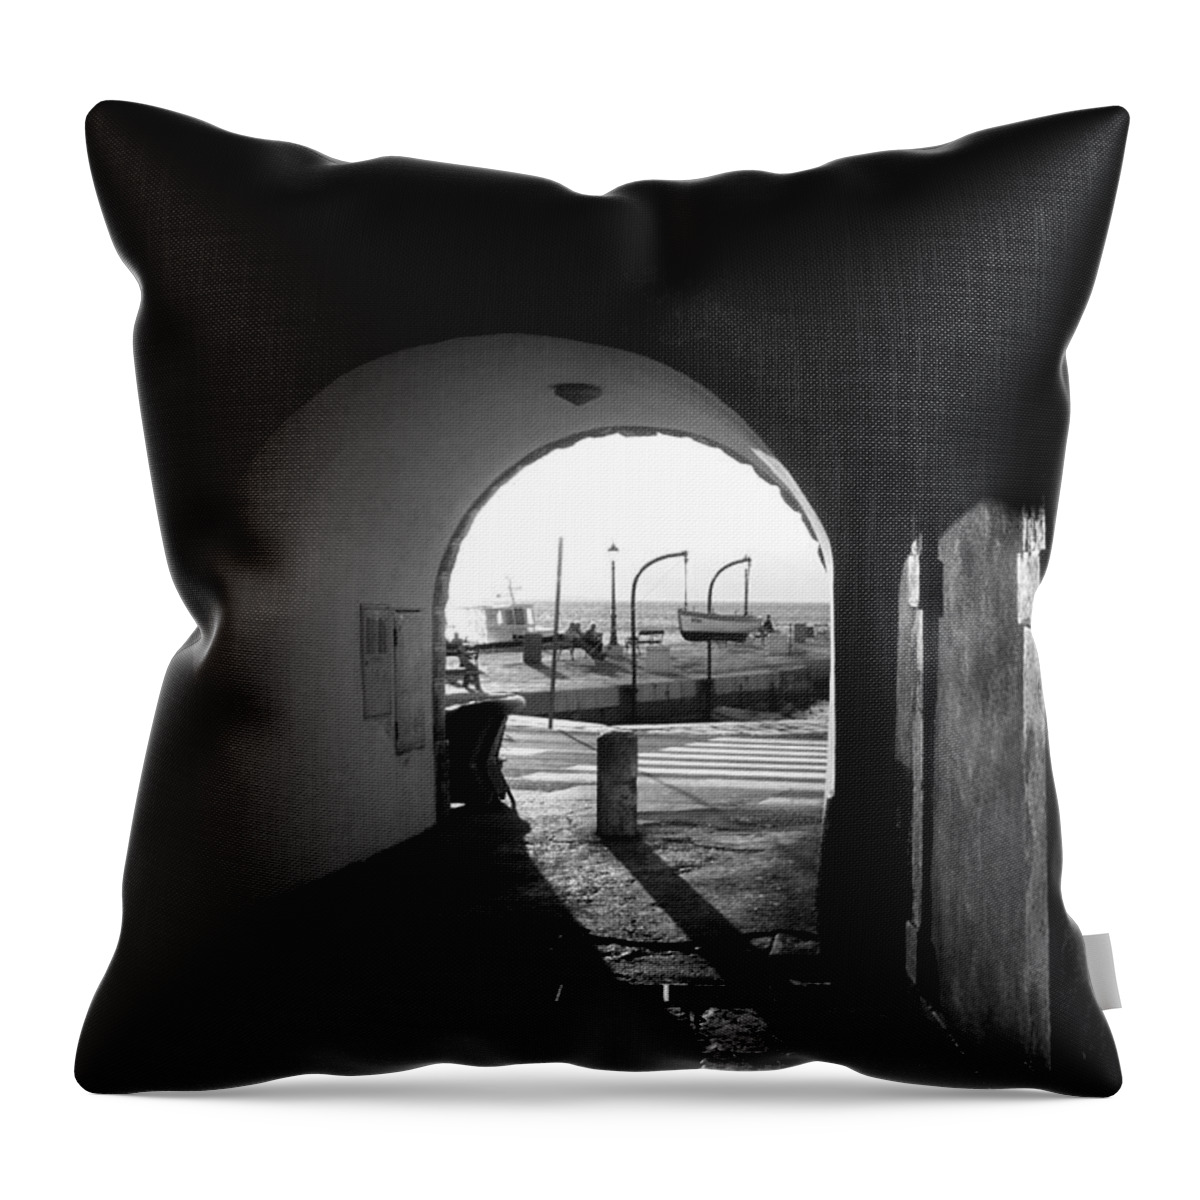 Adriatic Sea Throw Pillow featuring the photograph Adriatic Scene by Nina Ficur Feenan